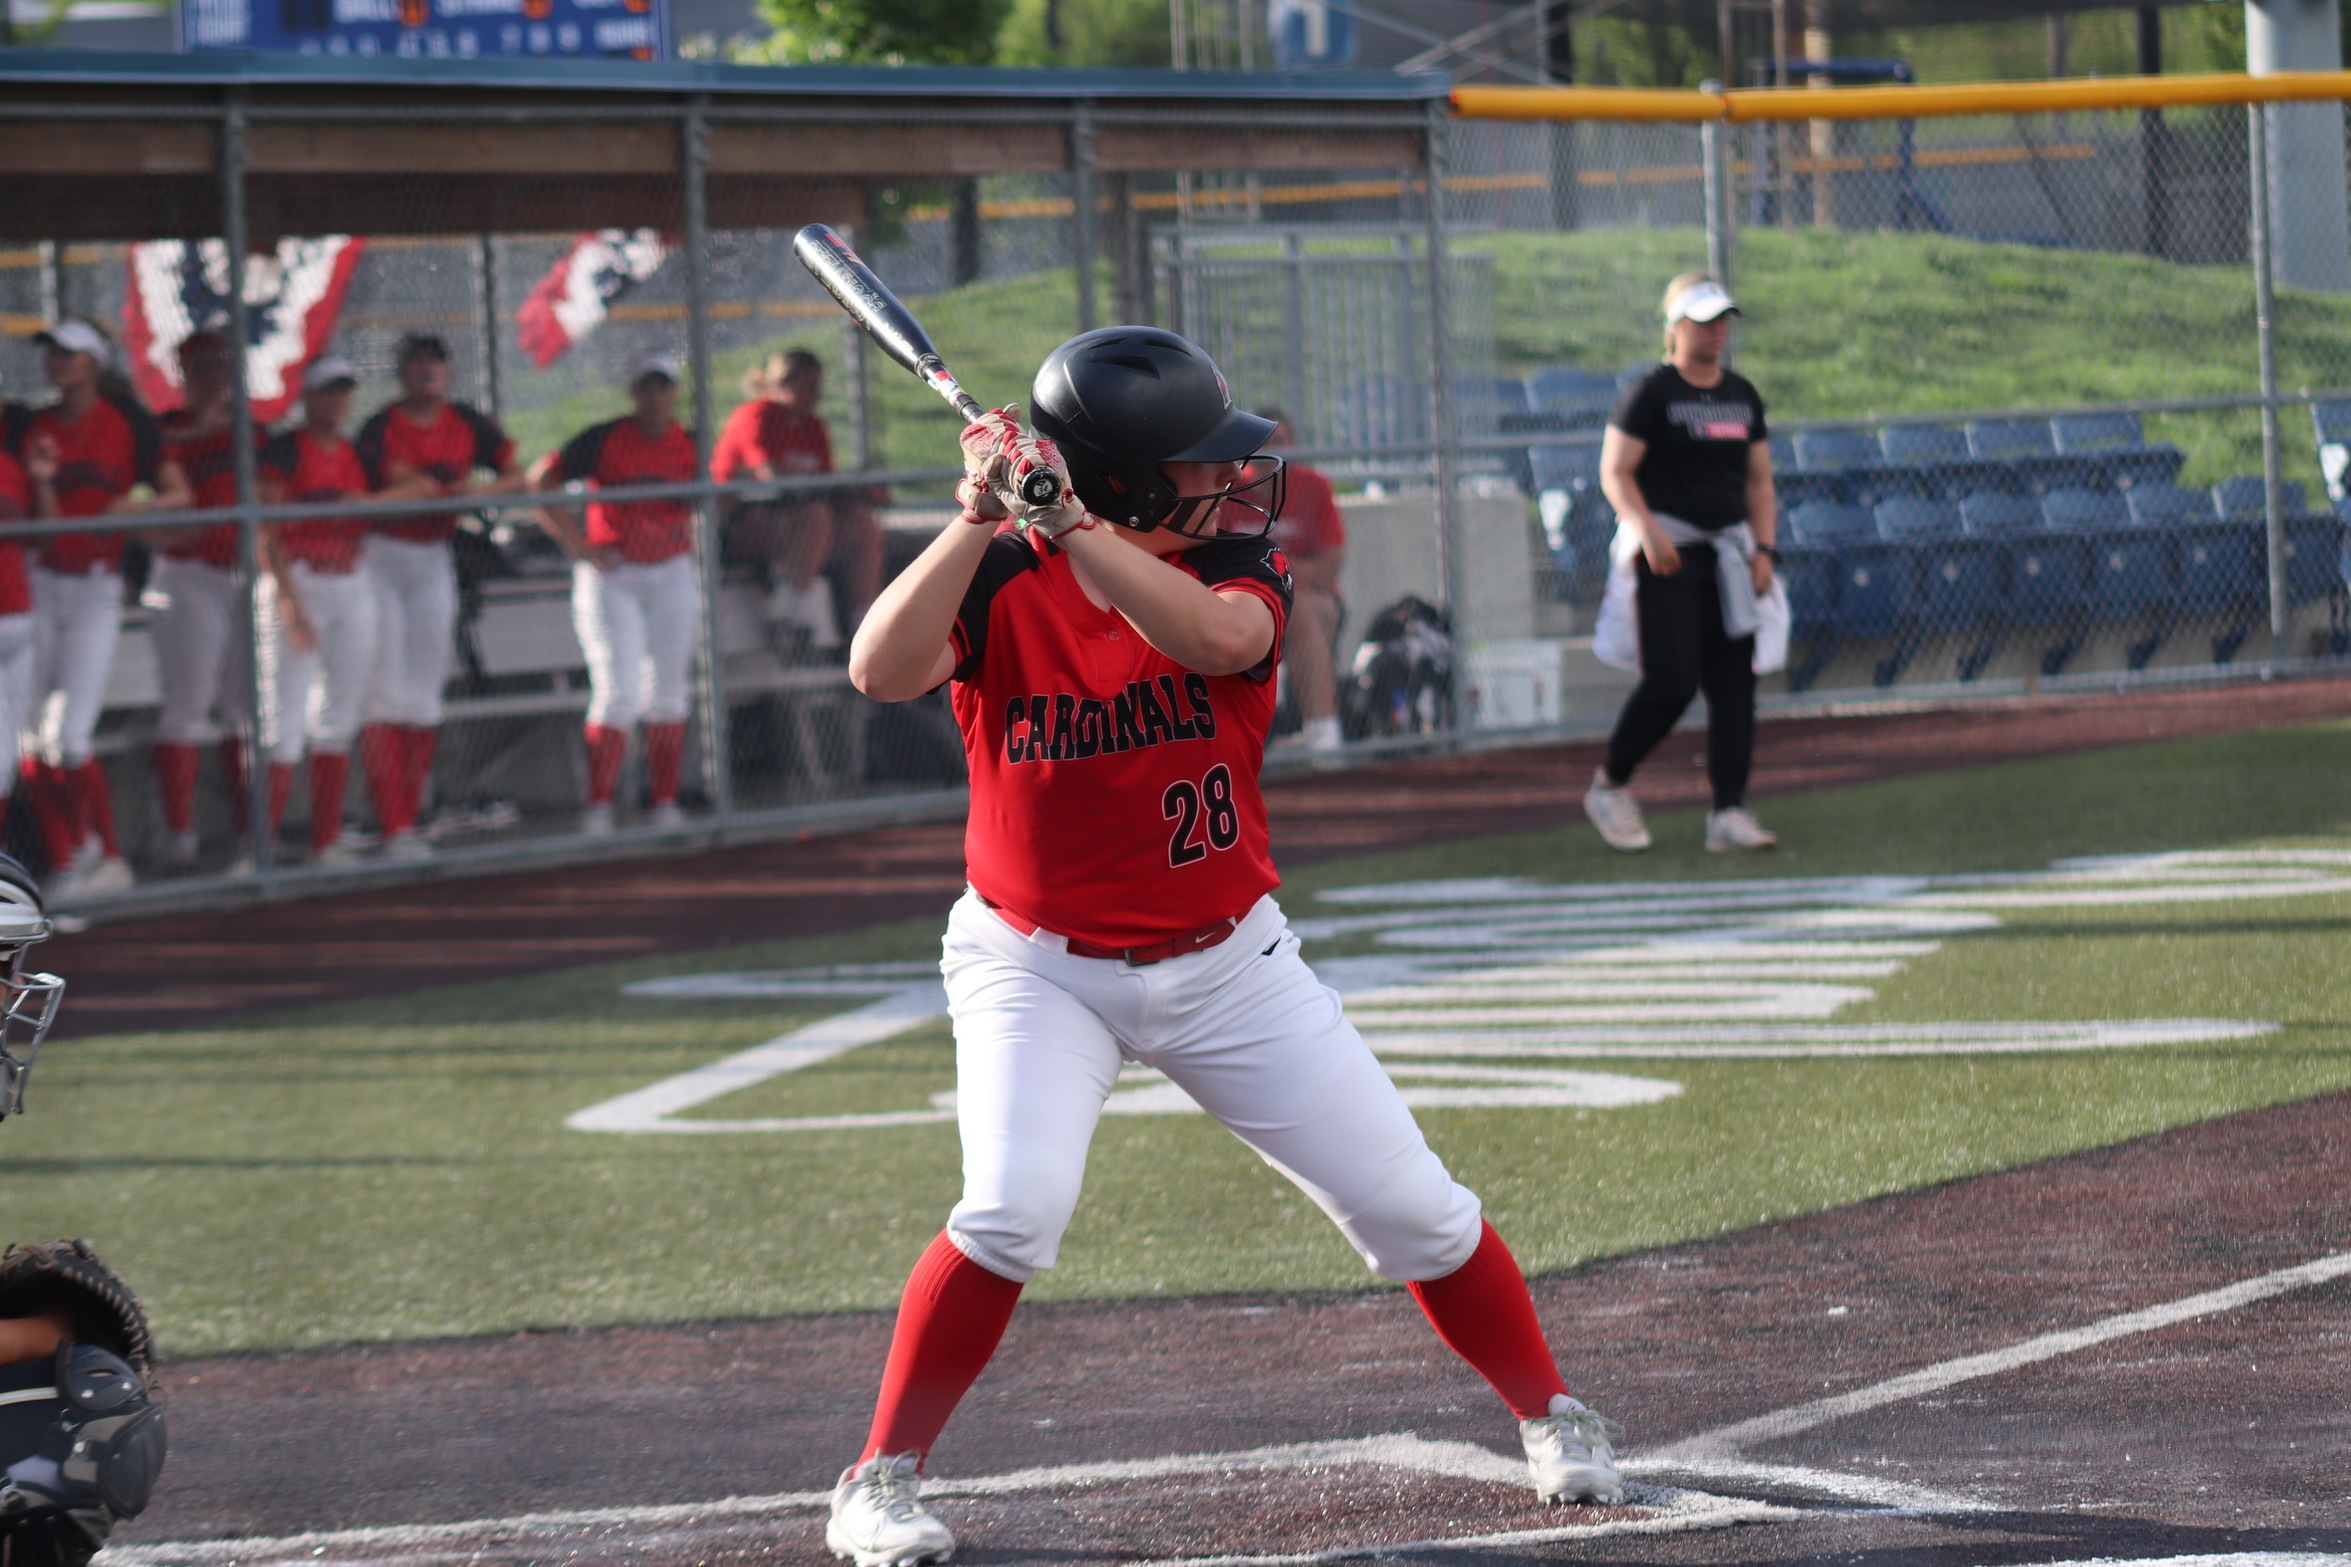 NCCAA WORLD SERIES DAY 2 RECAP: Cardinals take down the Eagles 8-1